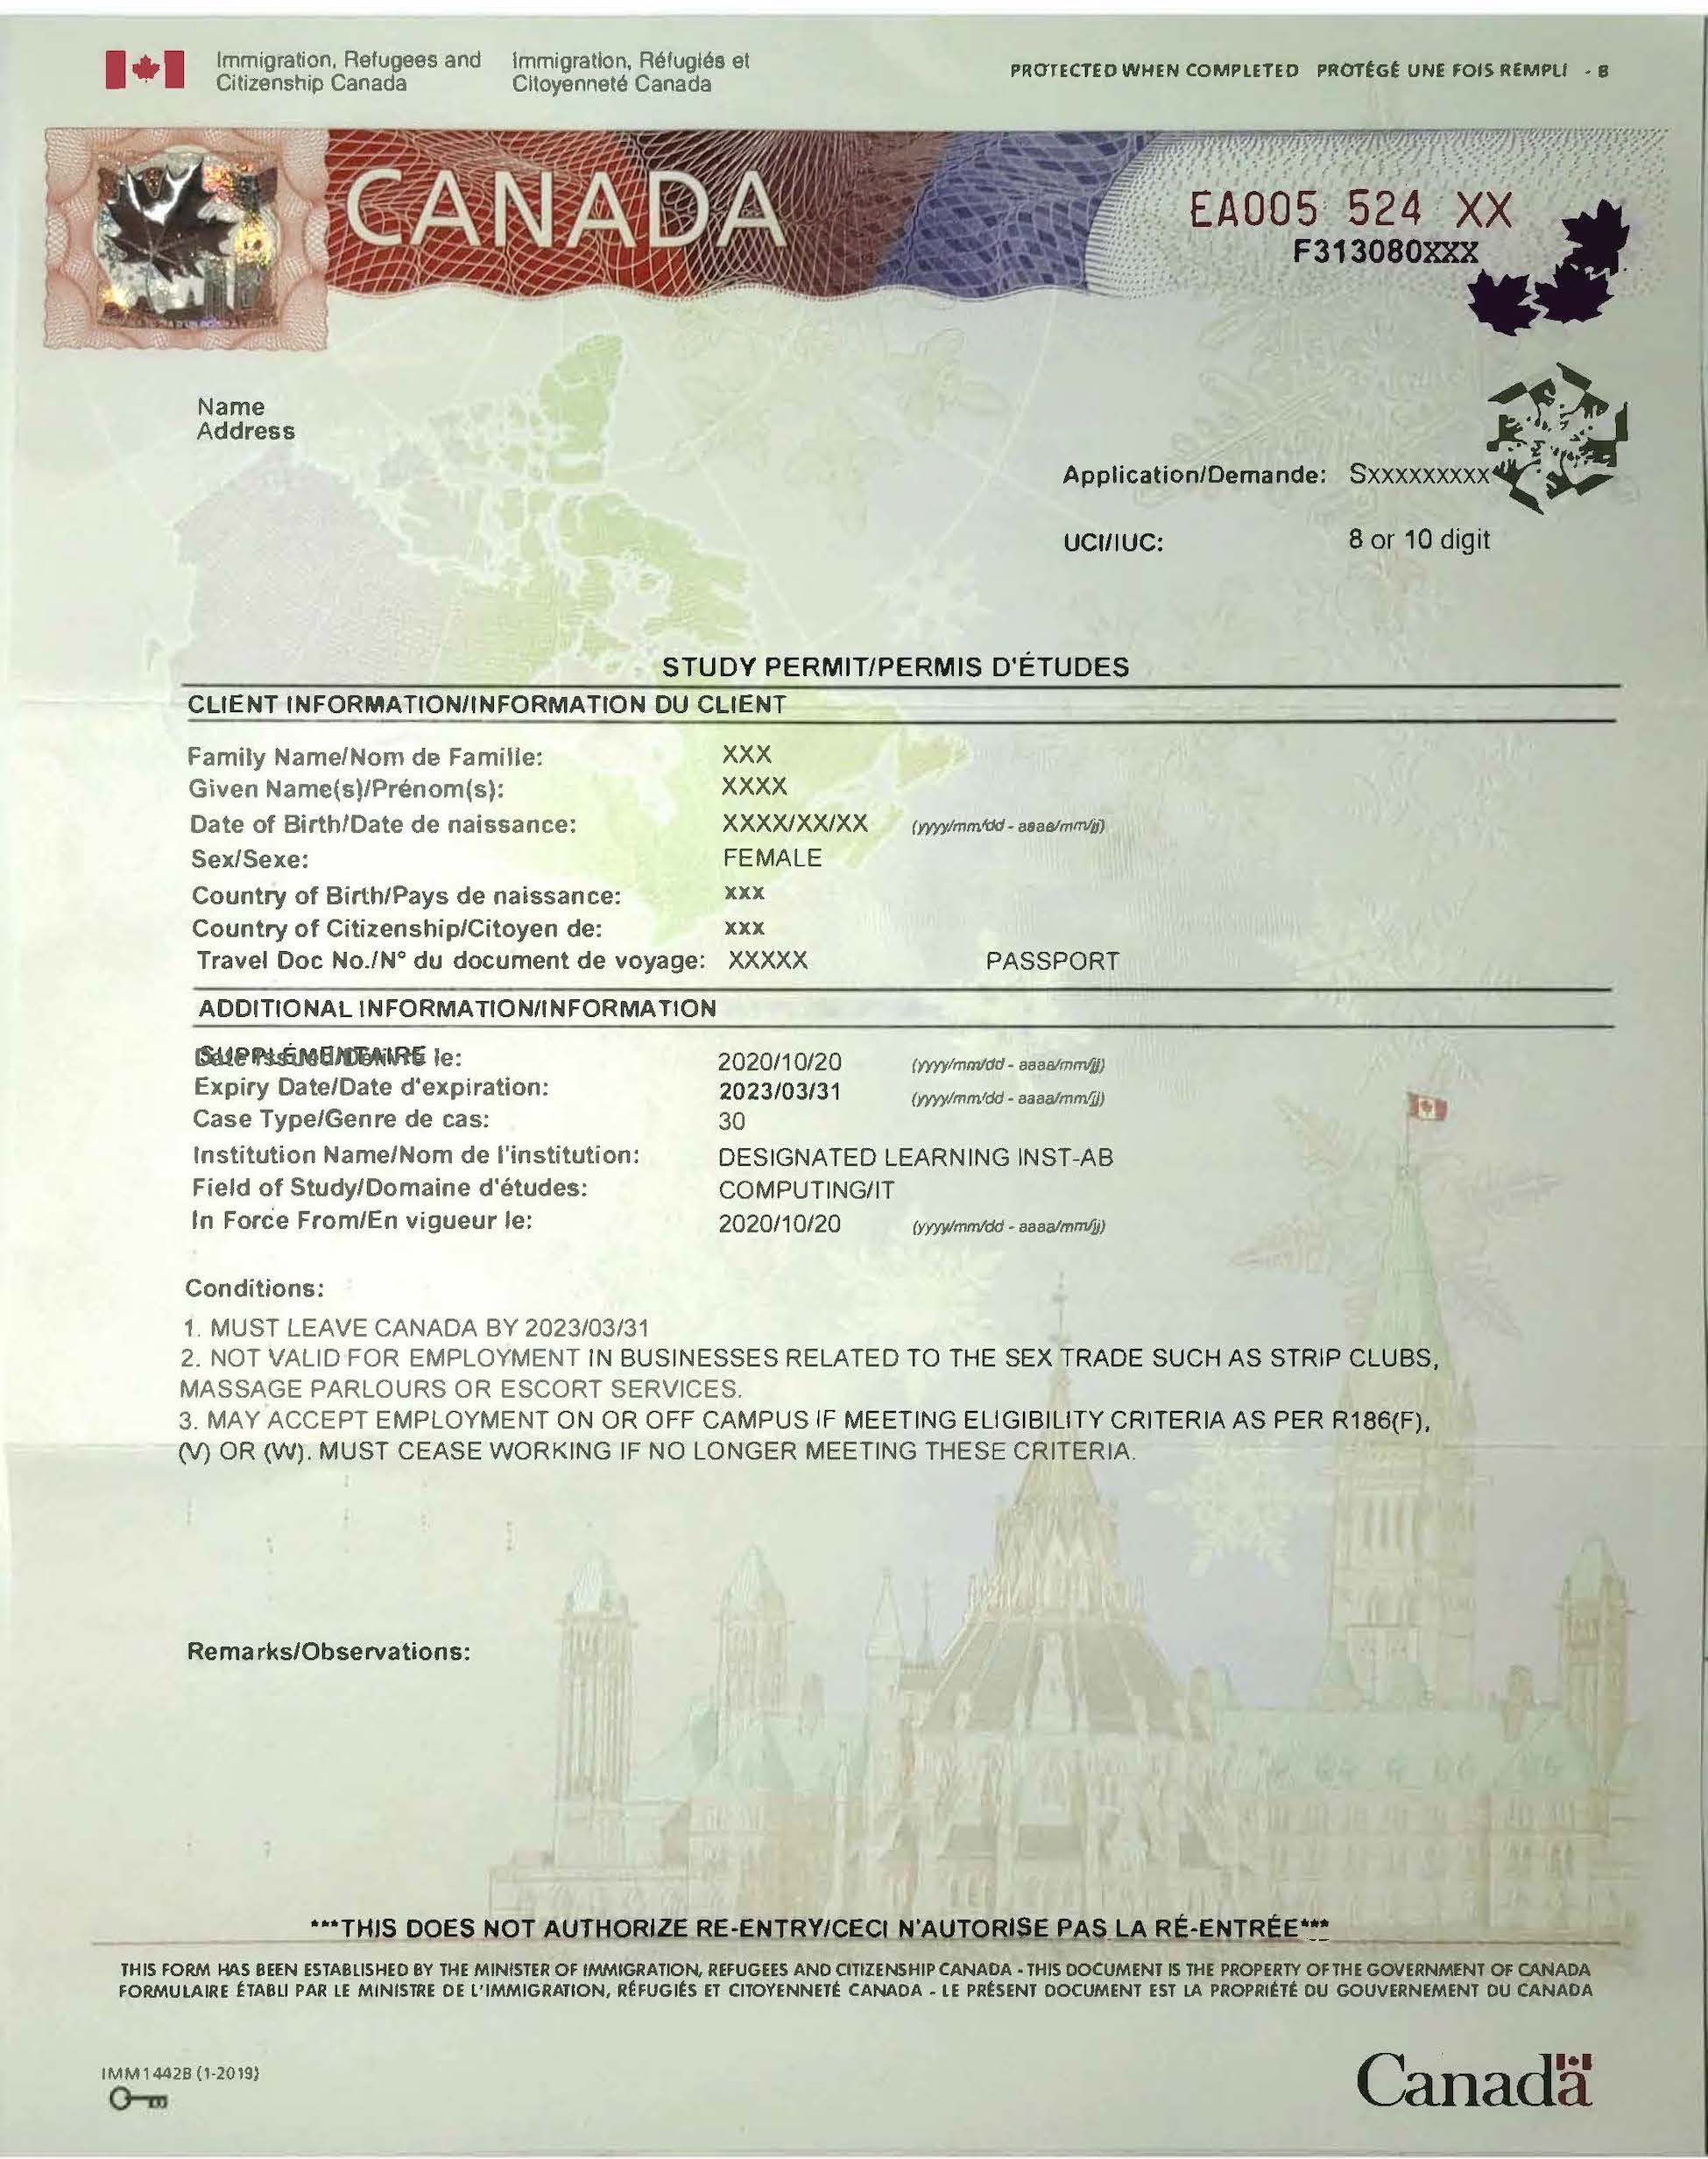 An example of a Canadian study permit